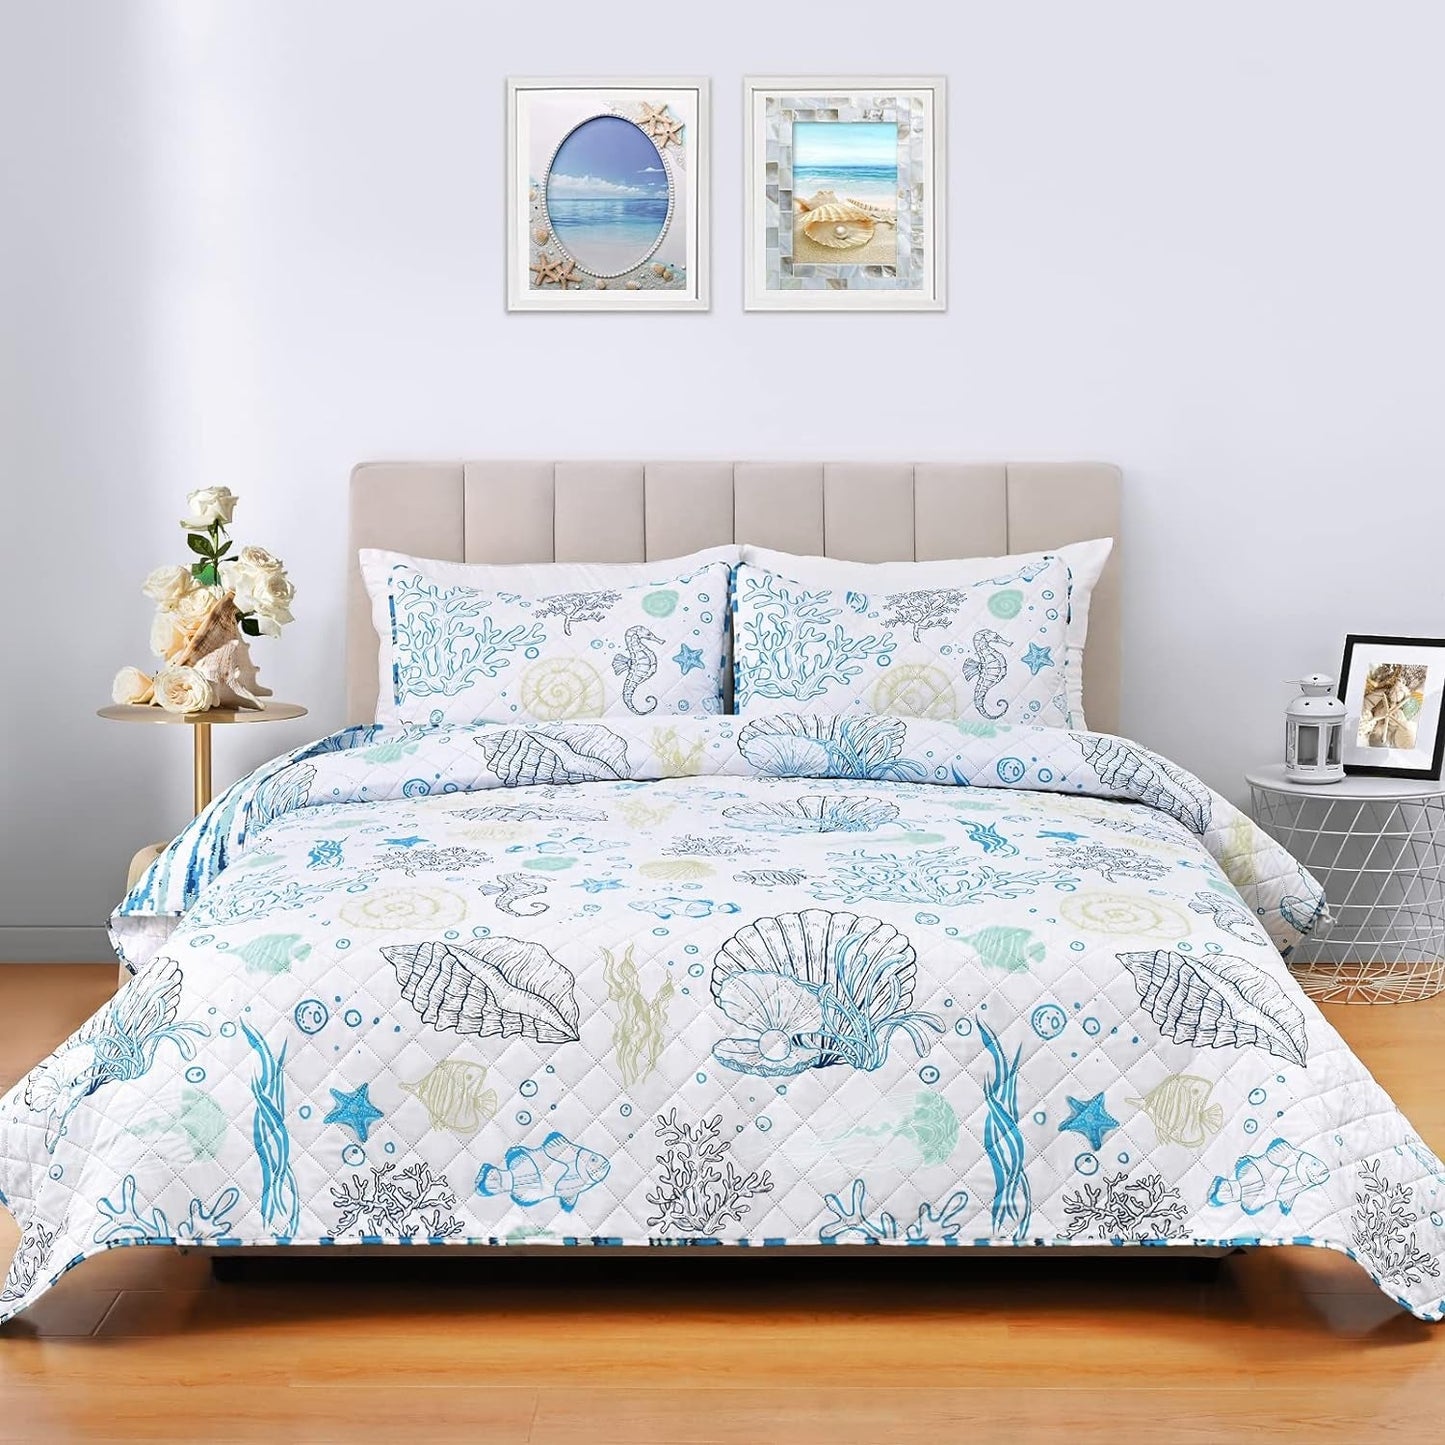 3 Pieces Reversible Quilts King Size Ocean Quilts Lightweight Beach Quilt Sets Beach Bedspread Coverlet Blue Coral Conch Seashell Coastal Bedding for All Season(1 Quilt, 2 Pillow Shams)